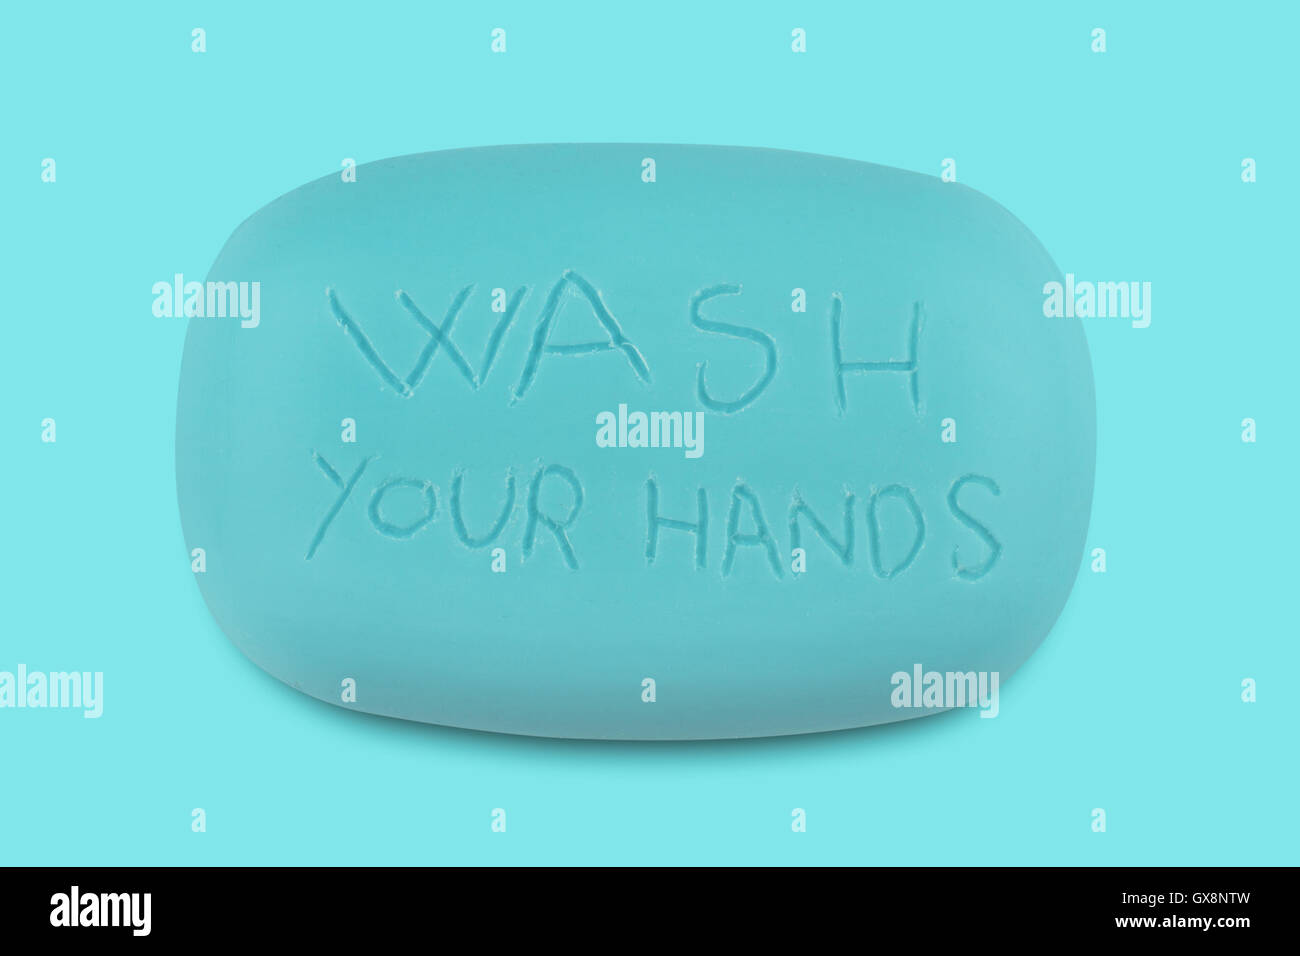 Top view of a blue soap bar with the words wash your hands scratched on it Stock Photo